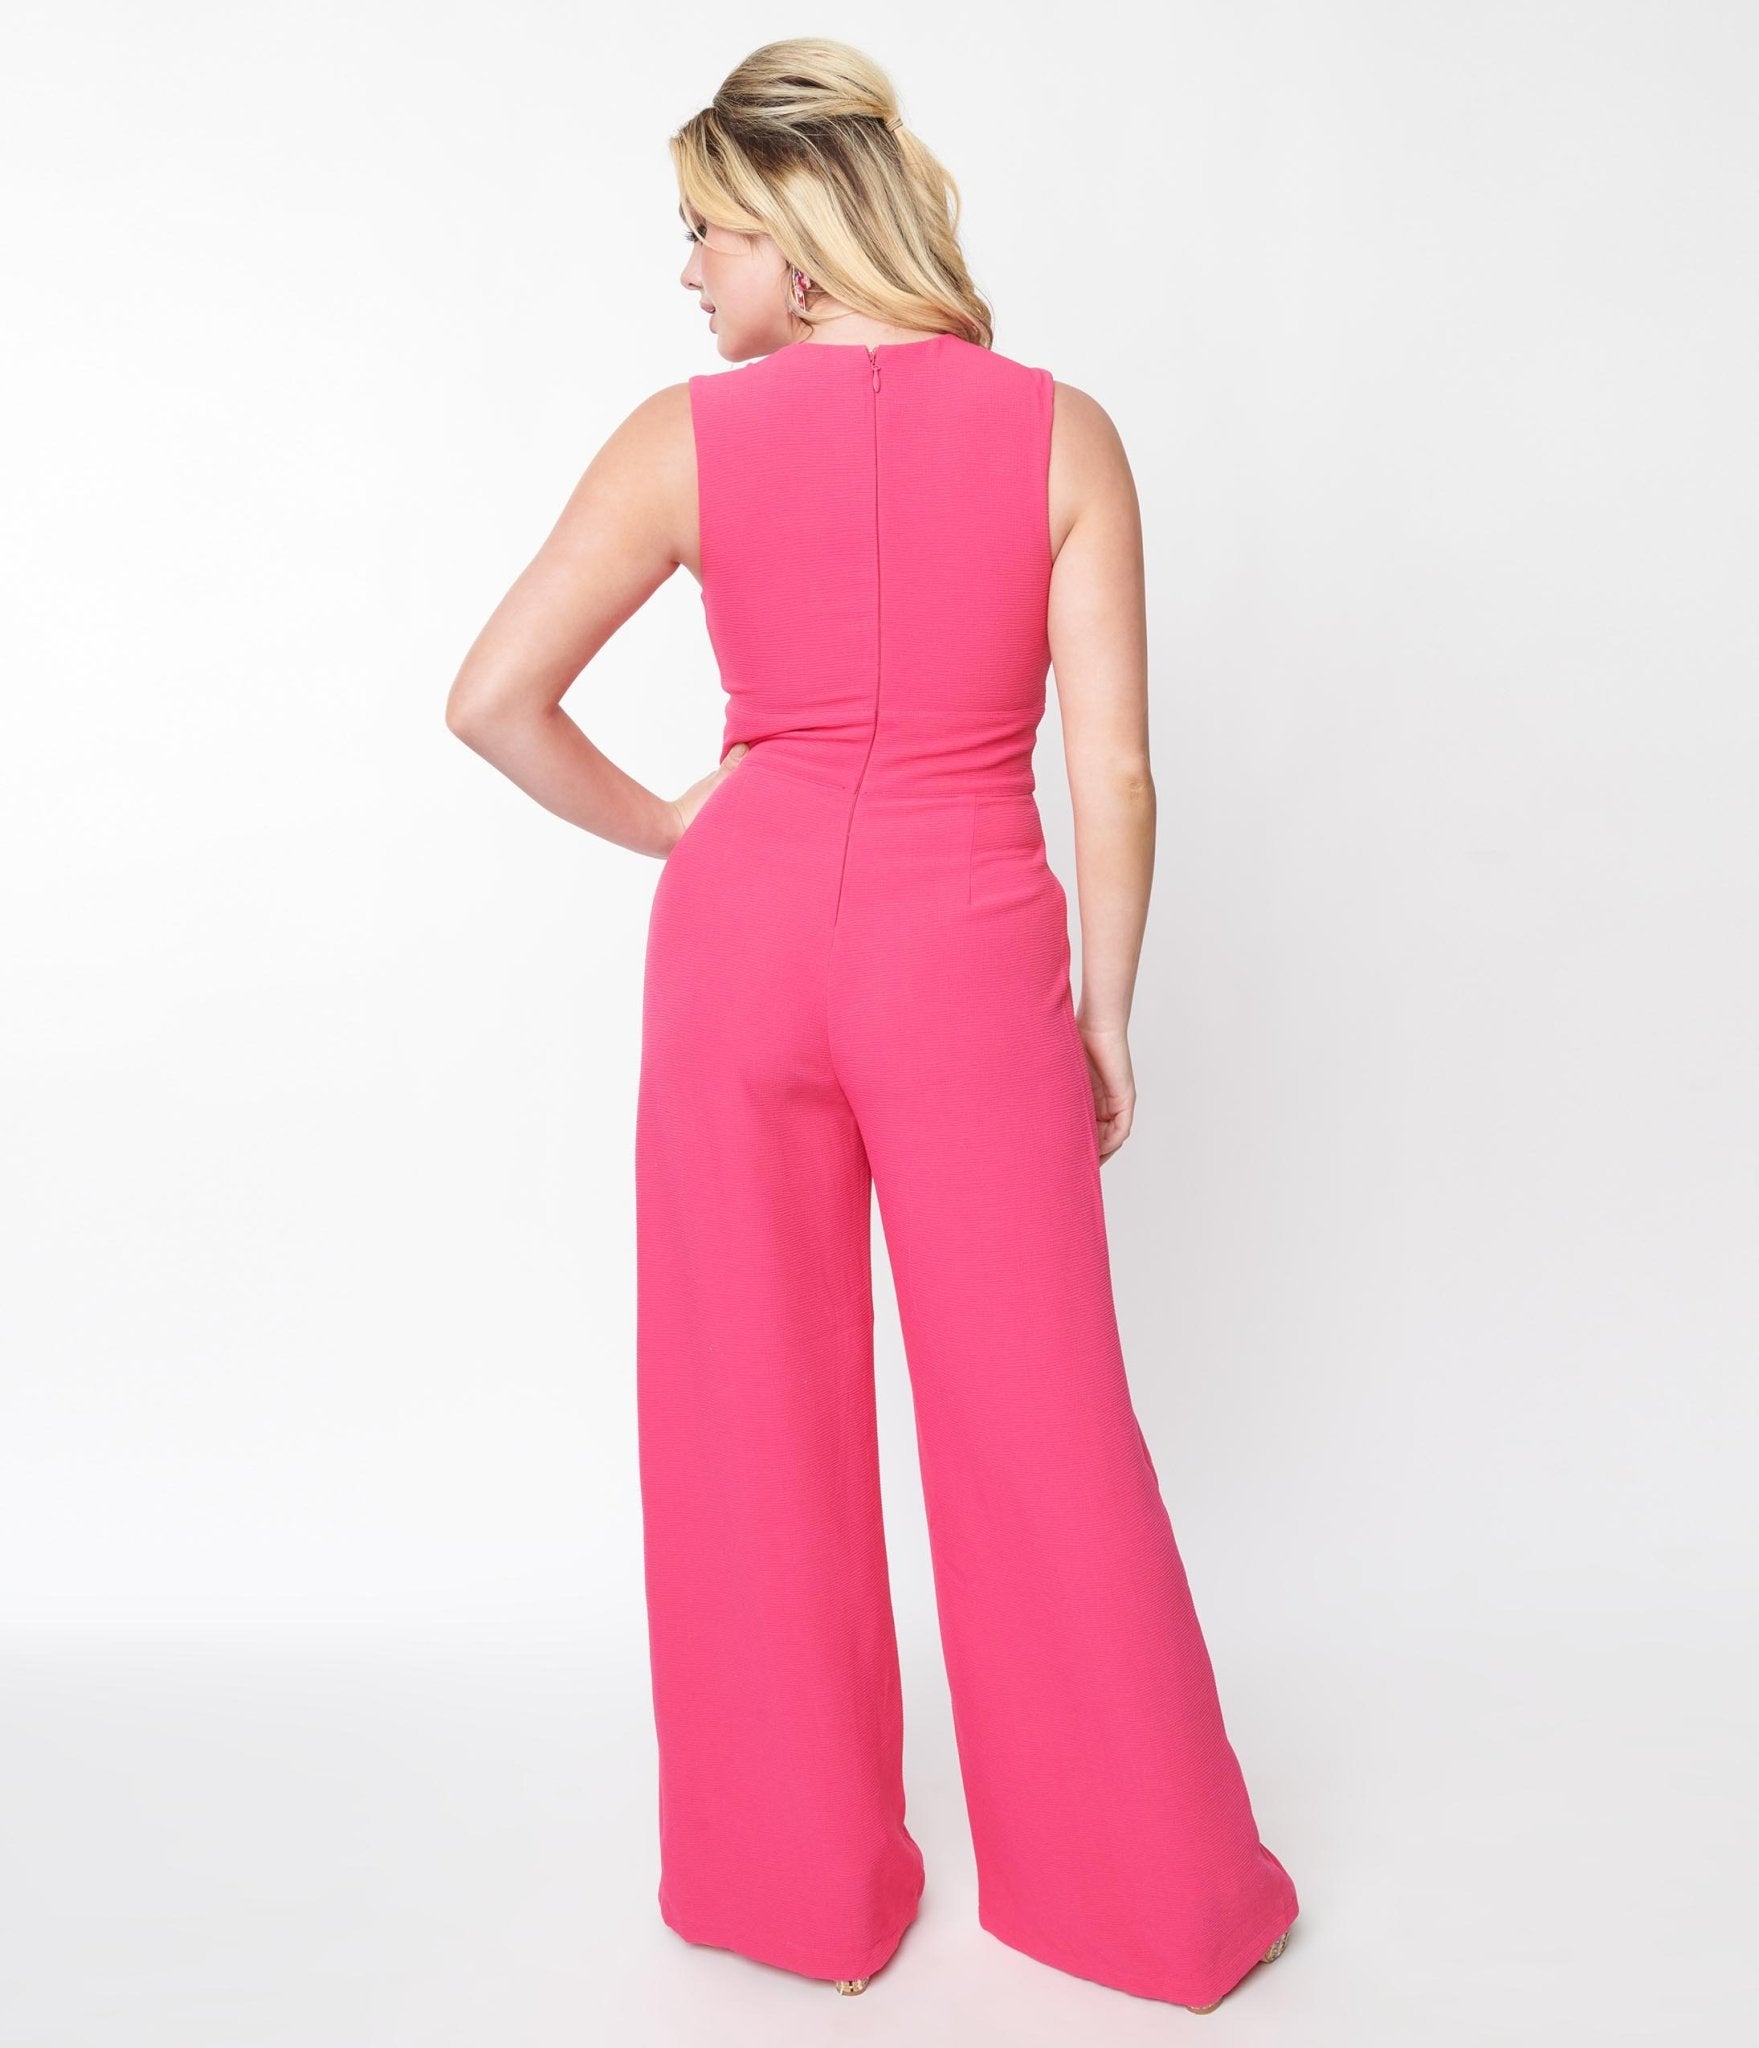 ASOS Women's Jumpsuits - Clothing | Stylicy India